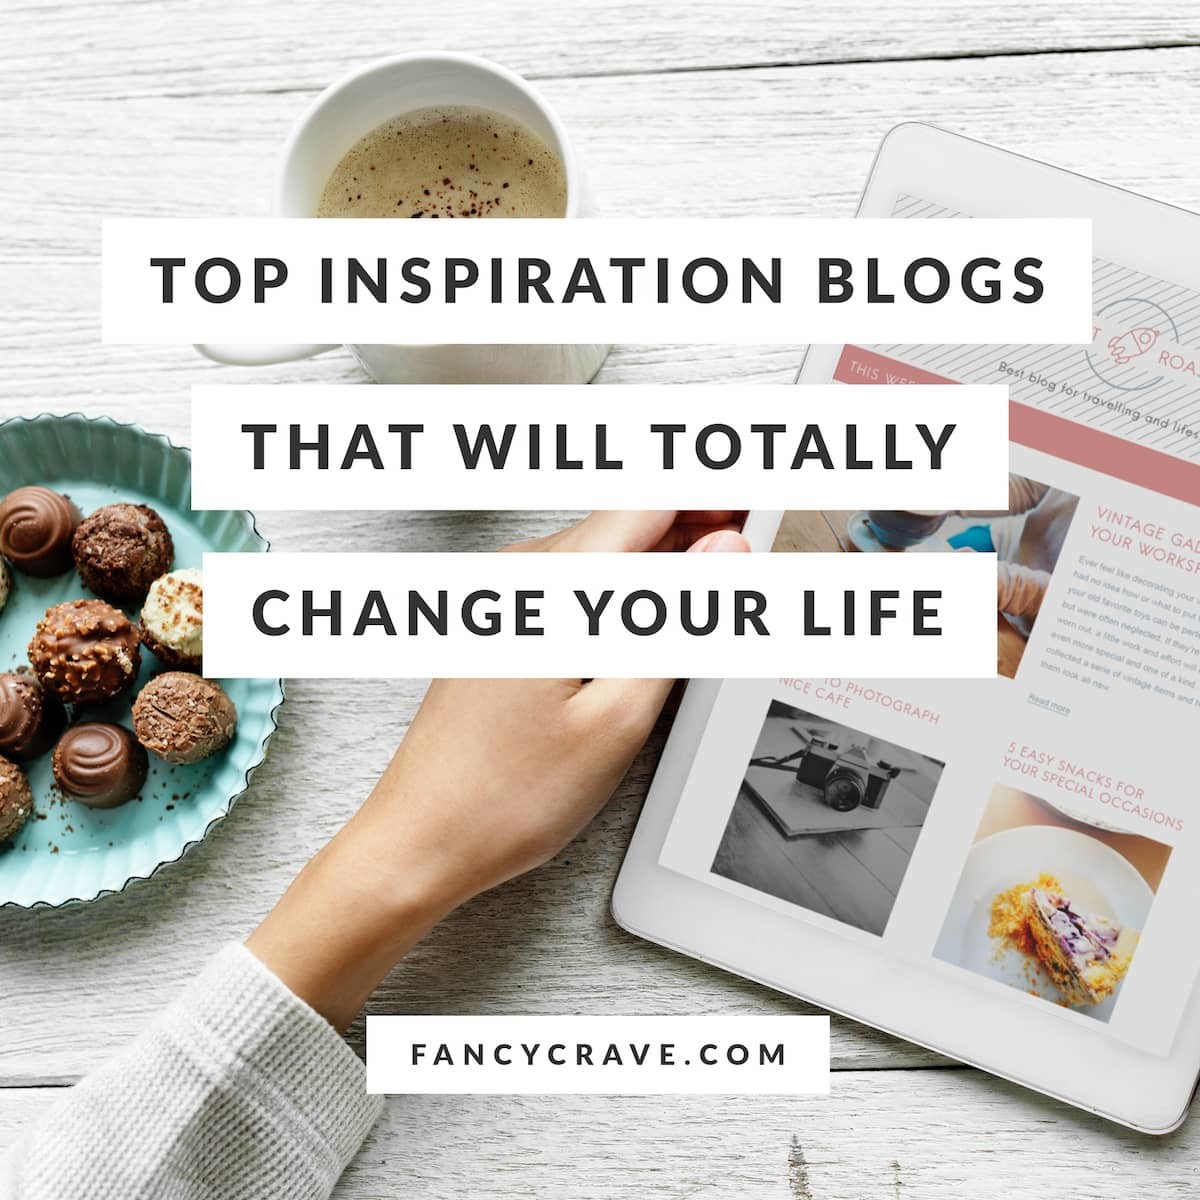 Top Inspiration Blogs That Will Totally Change Your Life